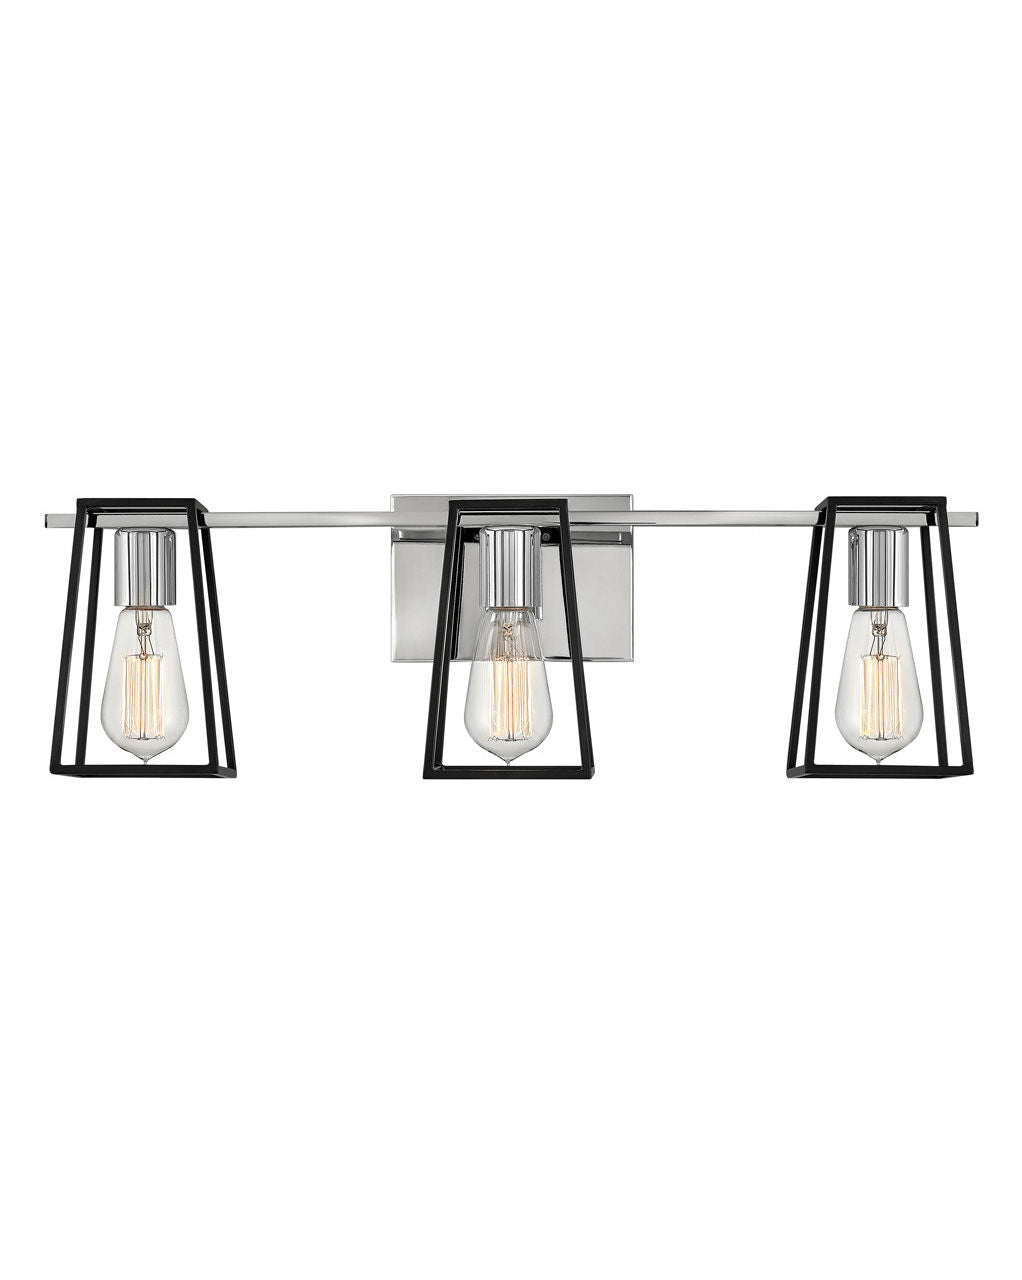 Filmore Vanity Wall Sconce Collection